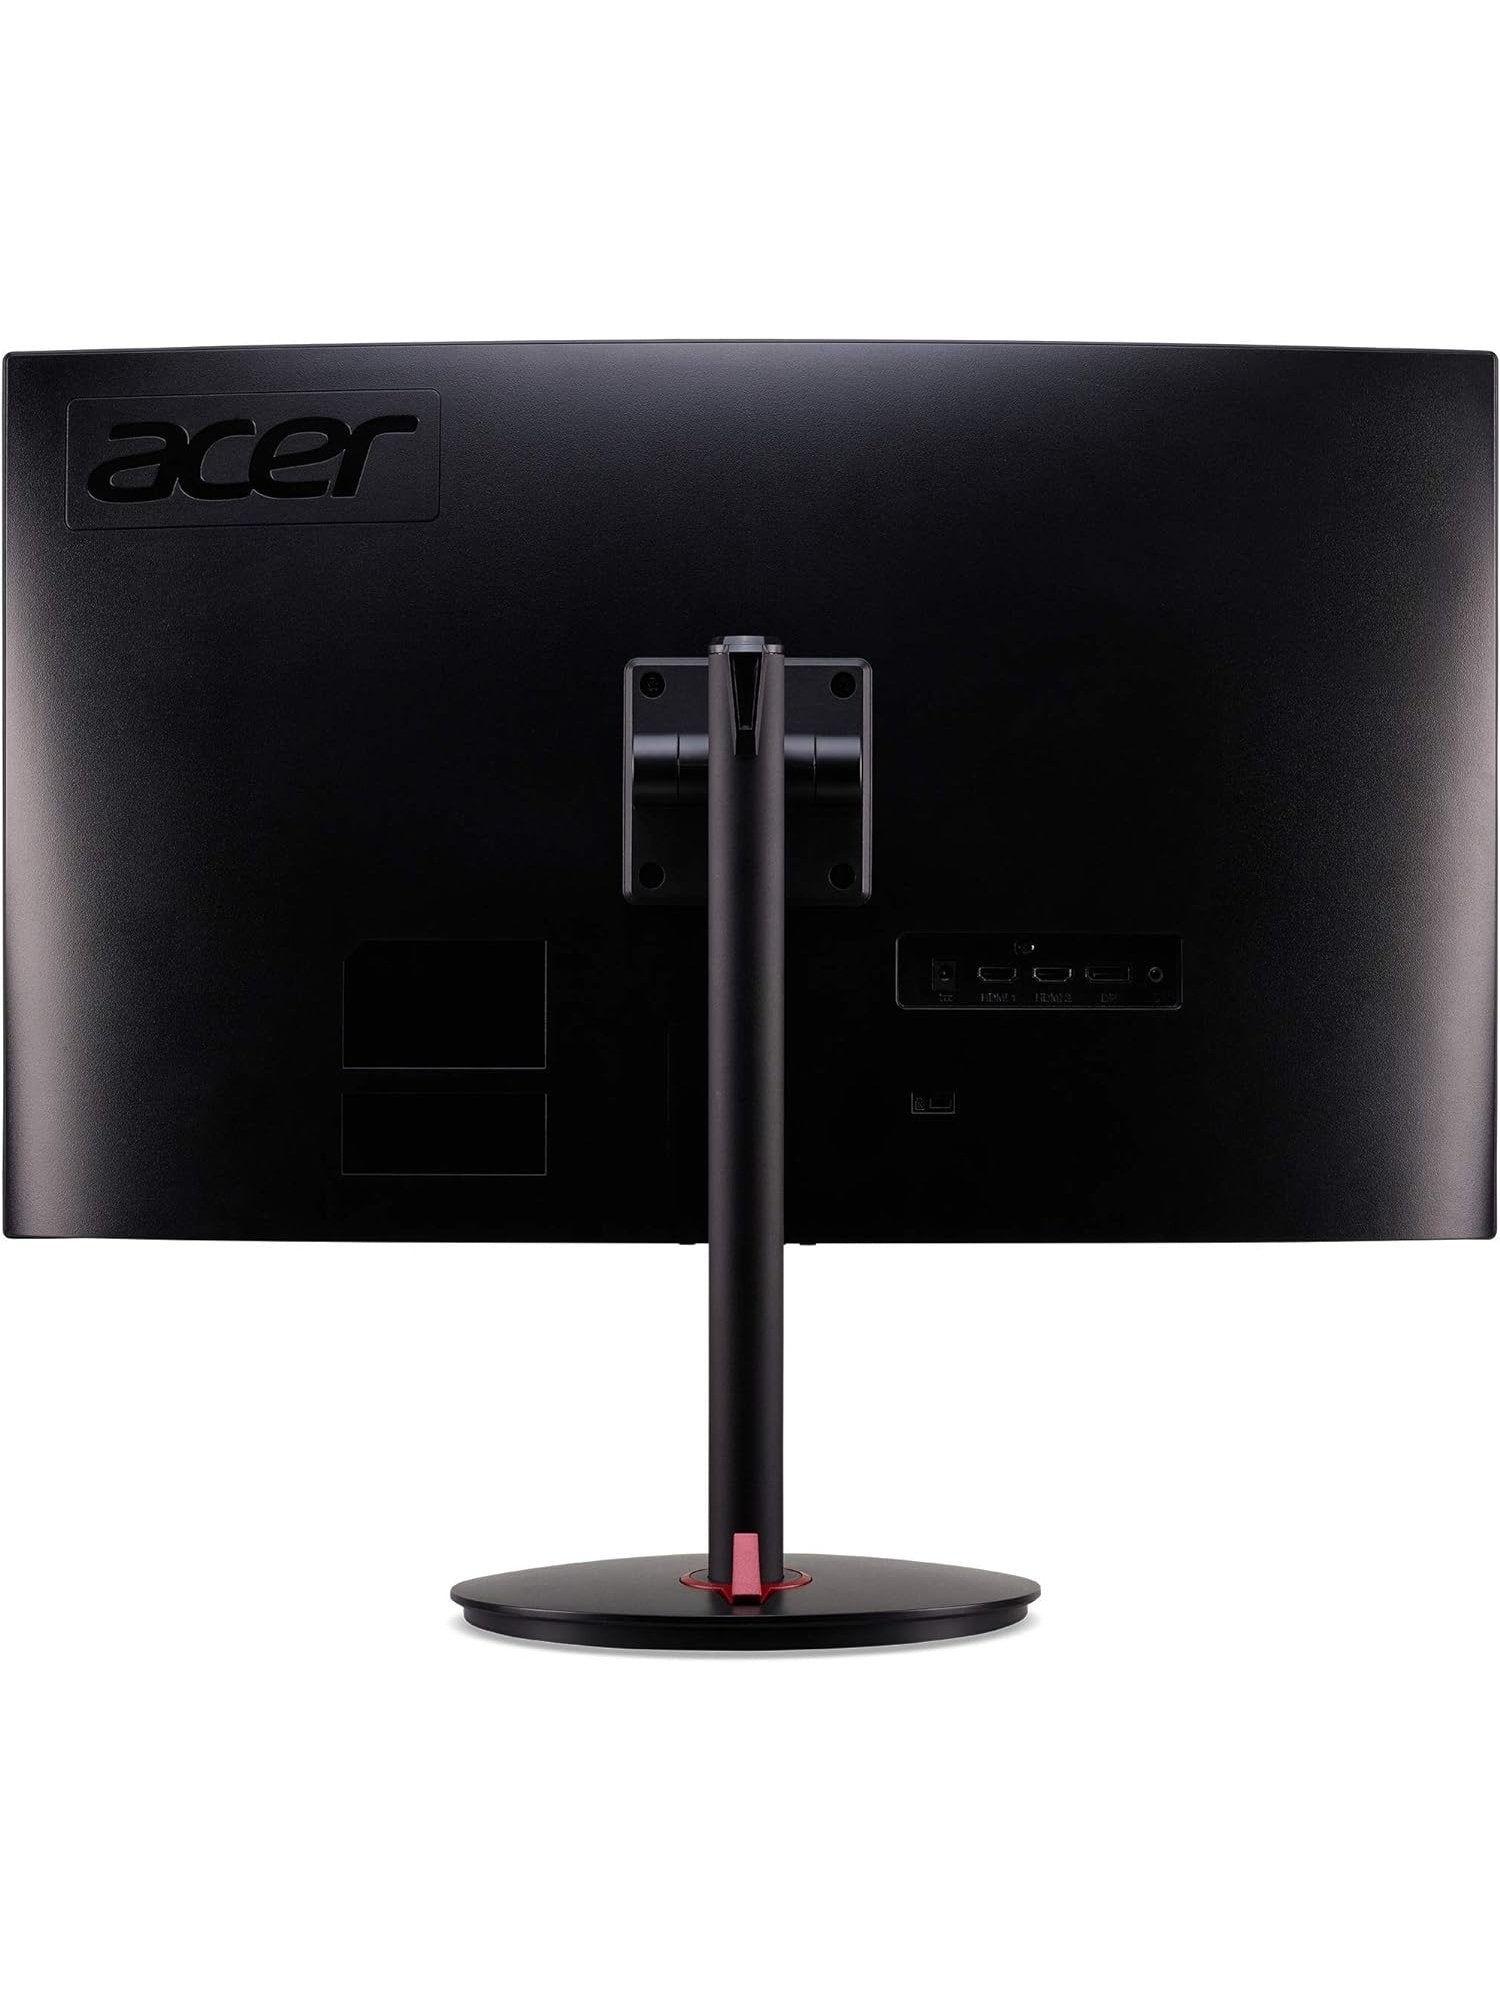 Acer Nitro XZ270 Xbmiipx 27" 1500R Curved Full HD 1920 x 1080 VA Zero-Frame Gaming Monitor with Adaptive Sync, 240Hz Refresh Rate and 1ms VRB Display Port & 2 x HDMI 2.0 Ports , Black